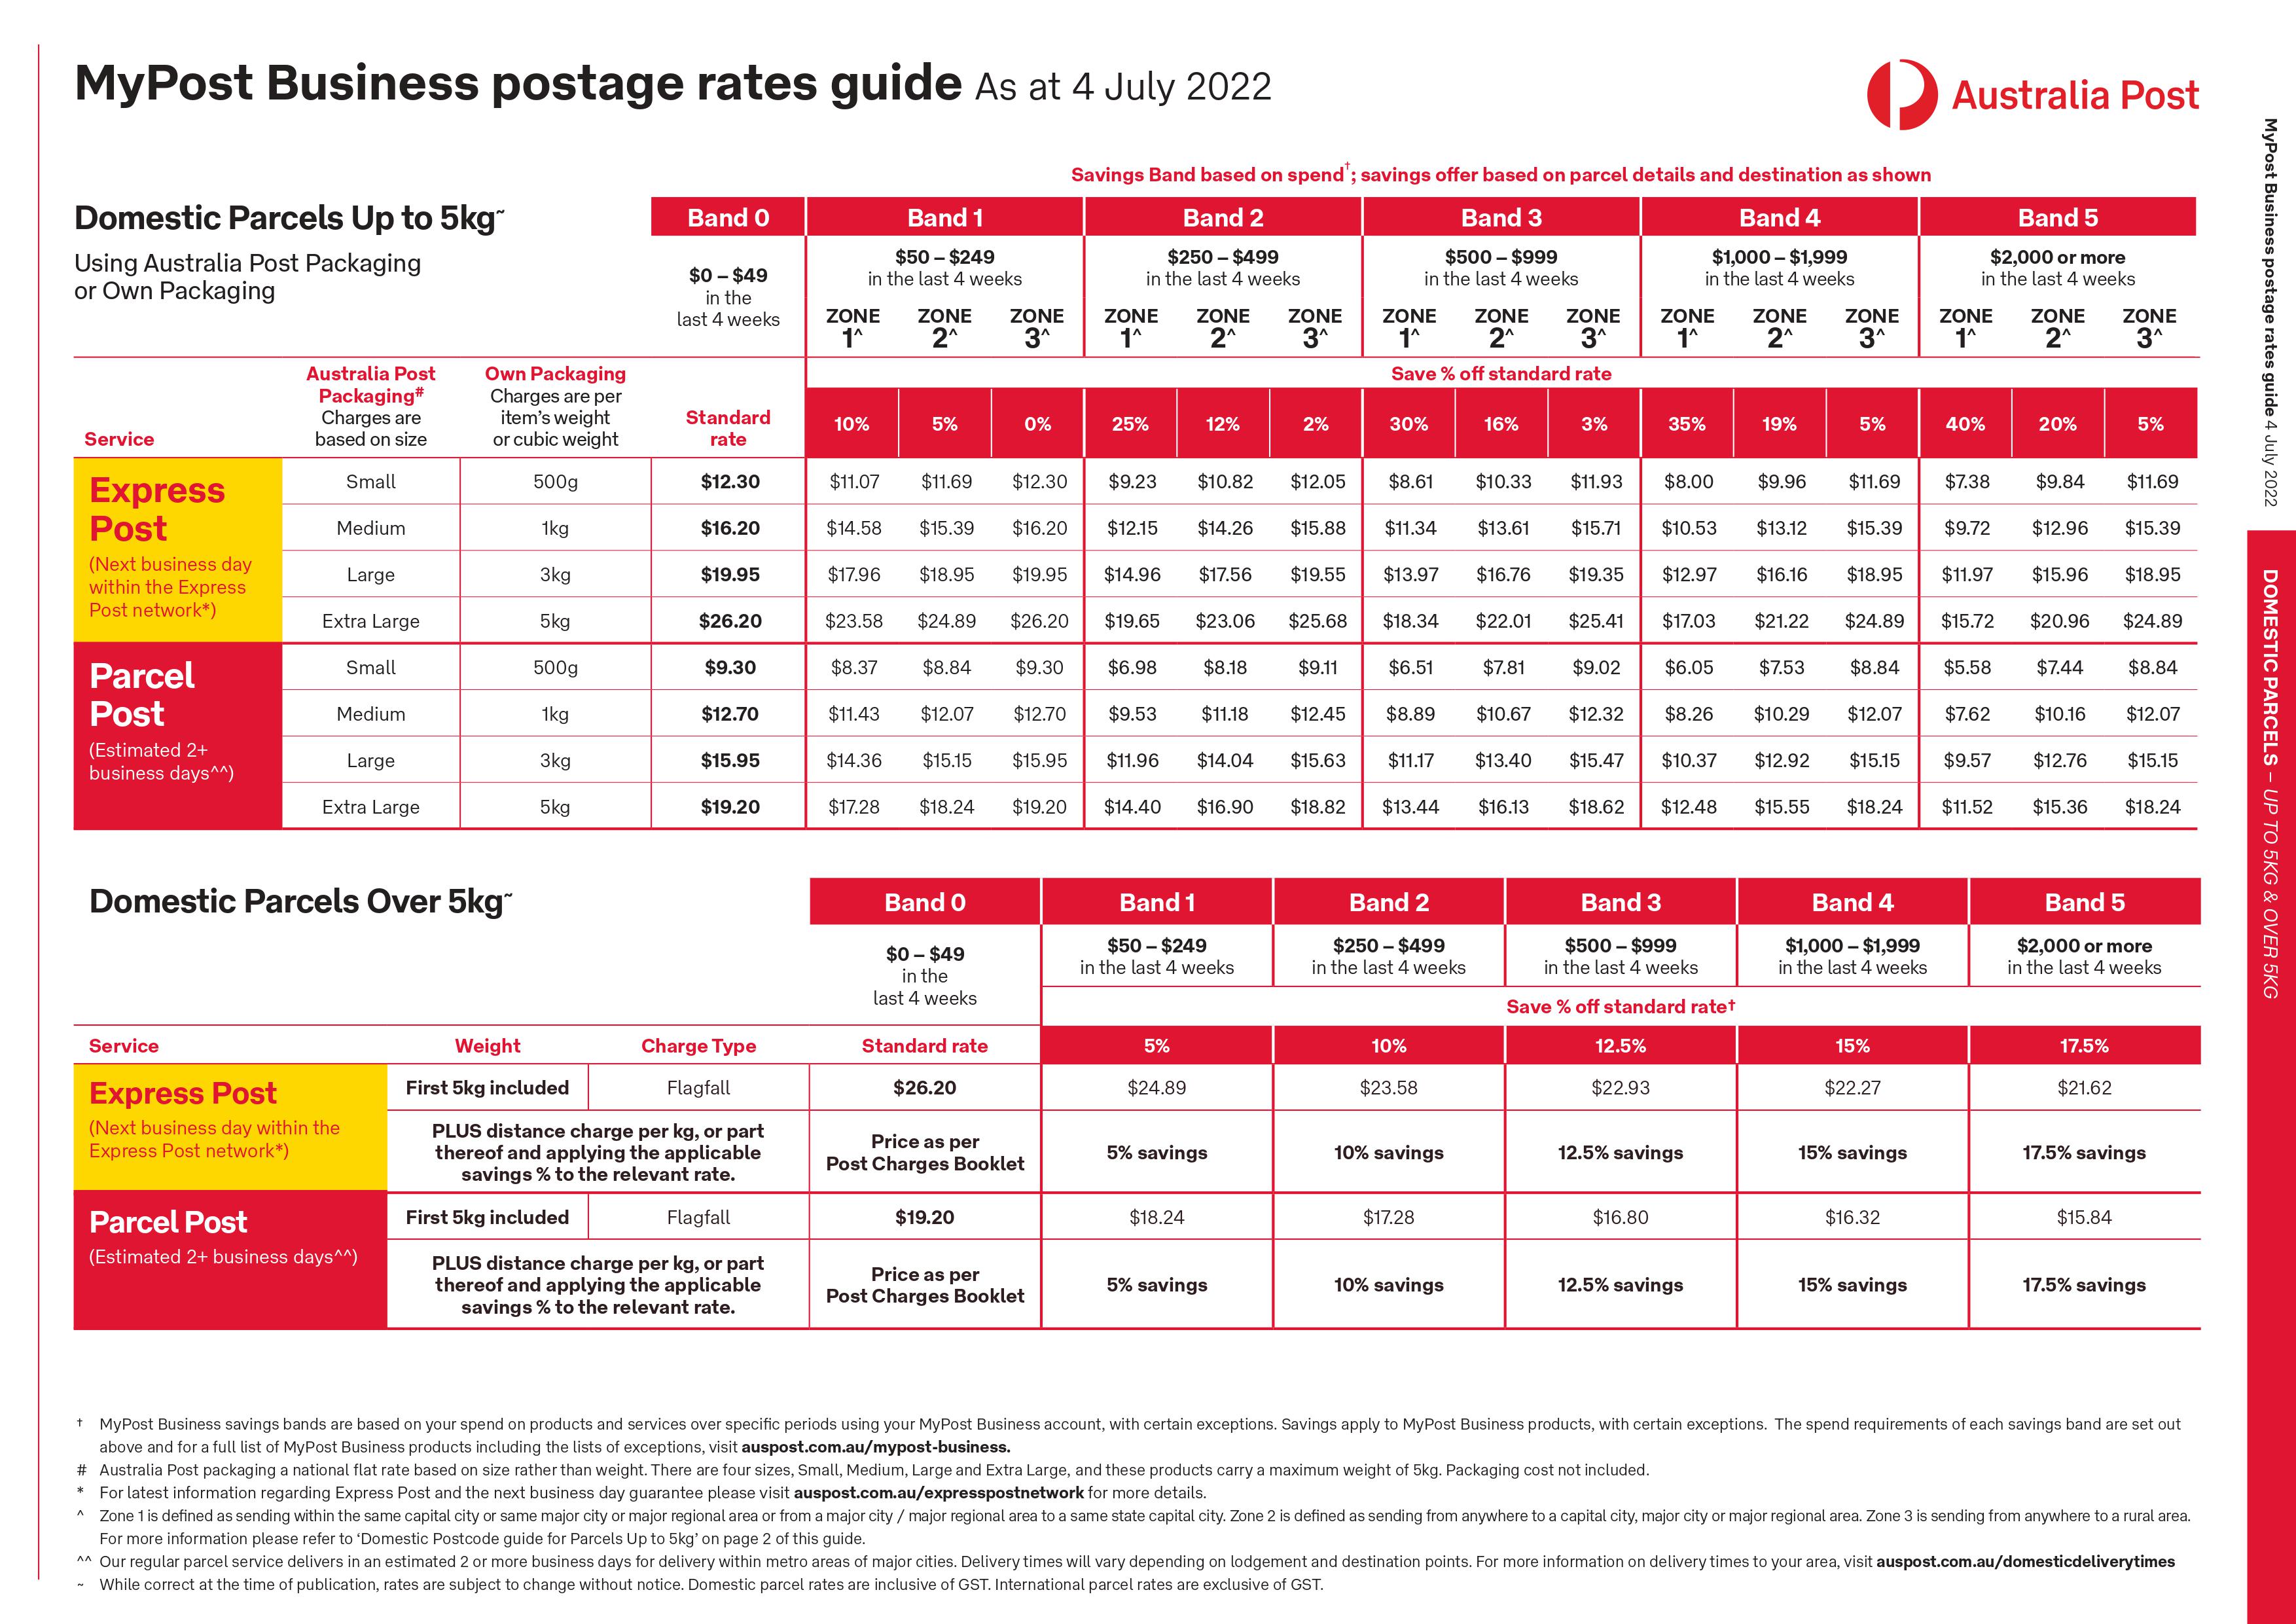 Services offered by Australia Post MyPost Business